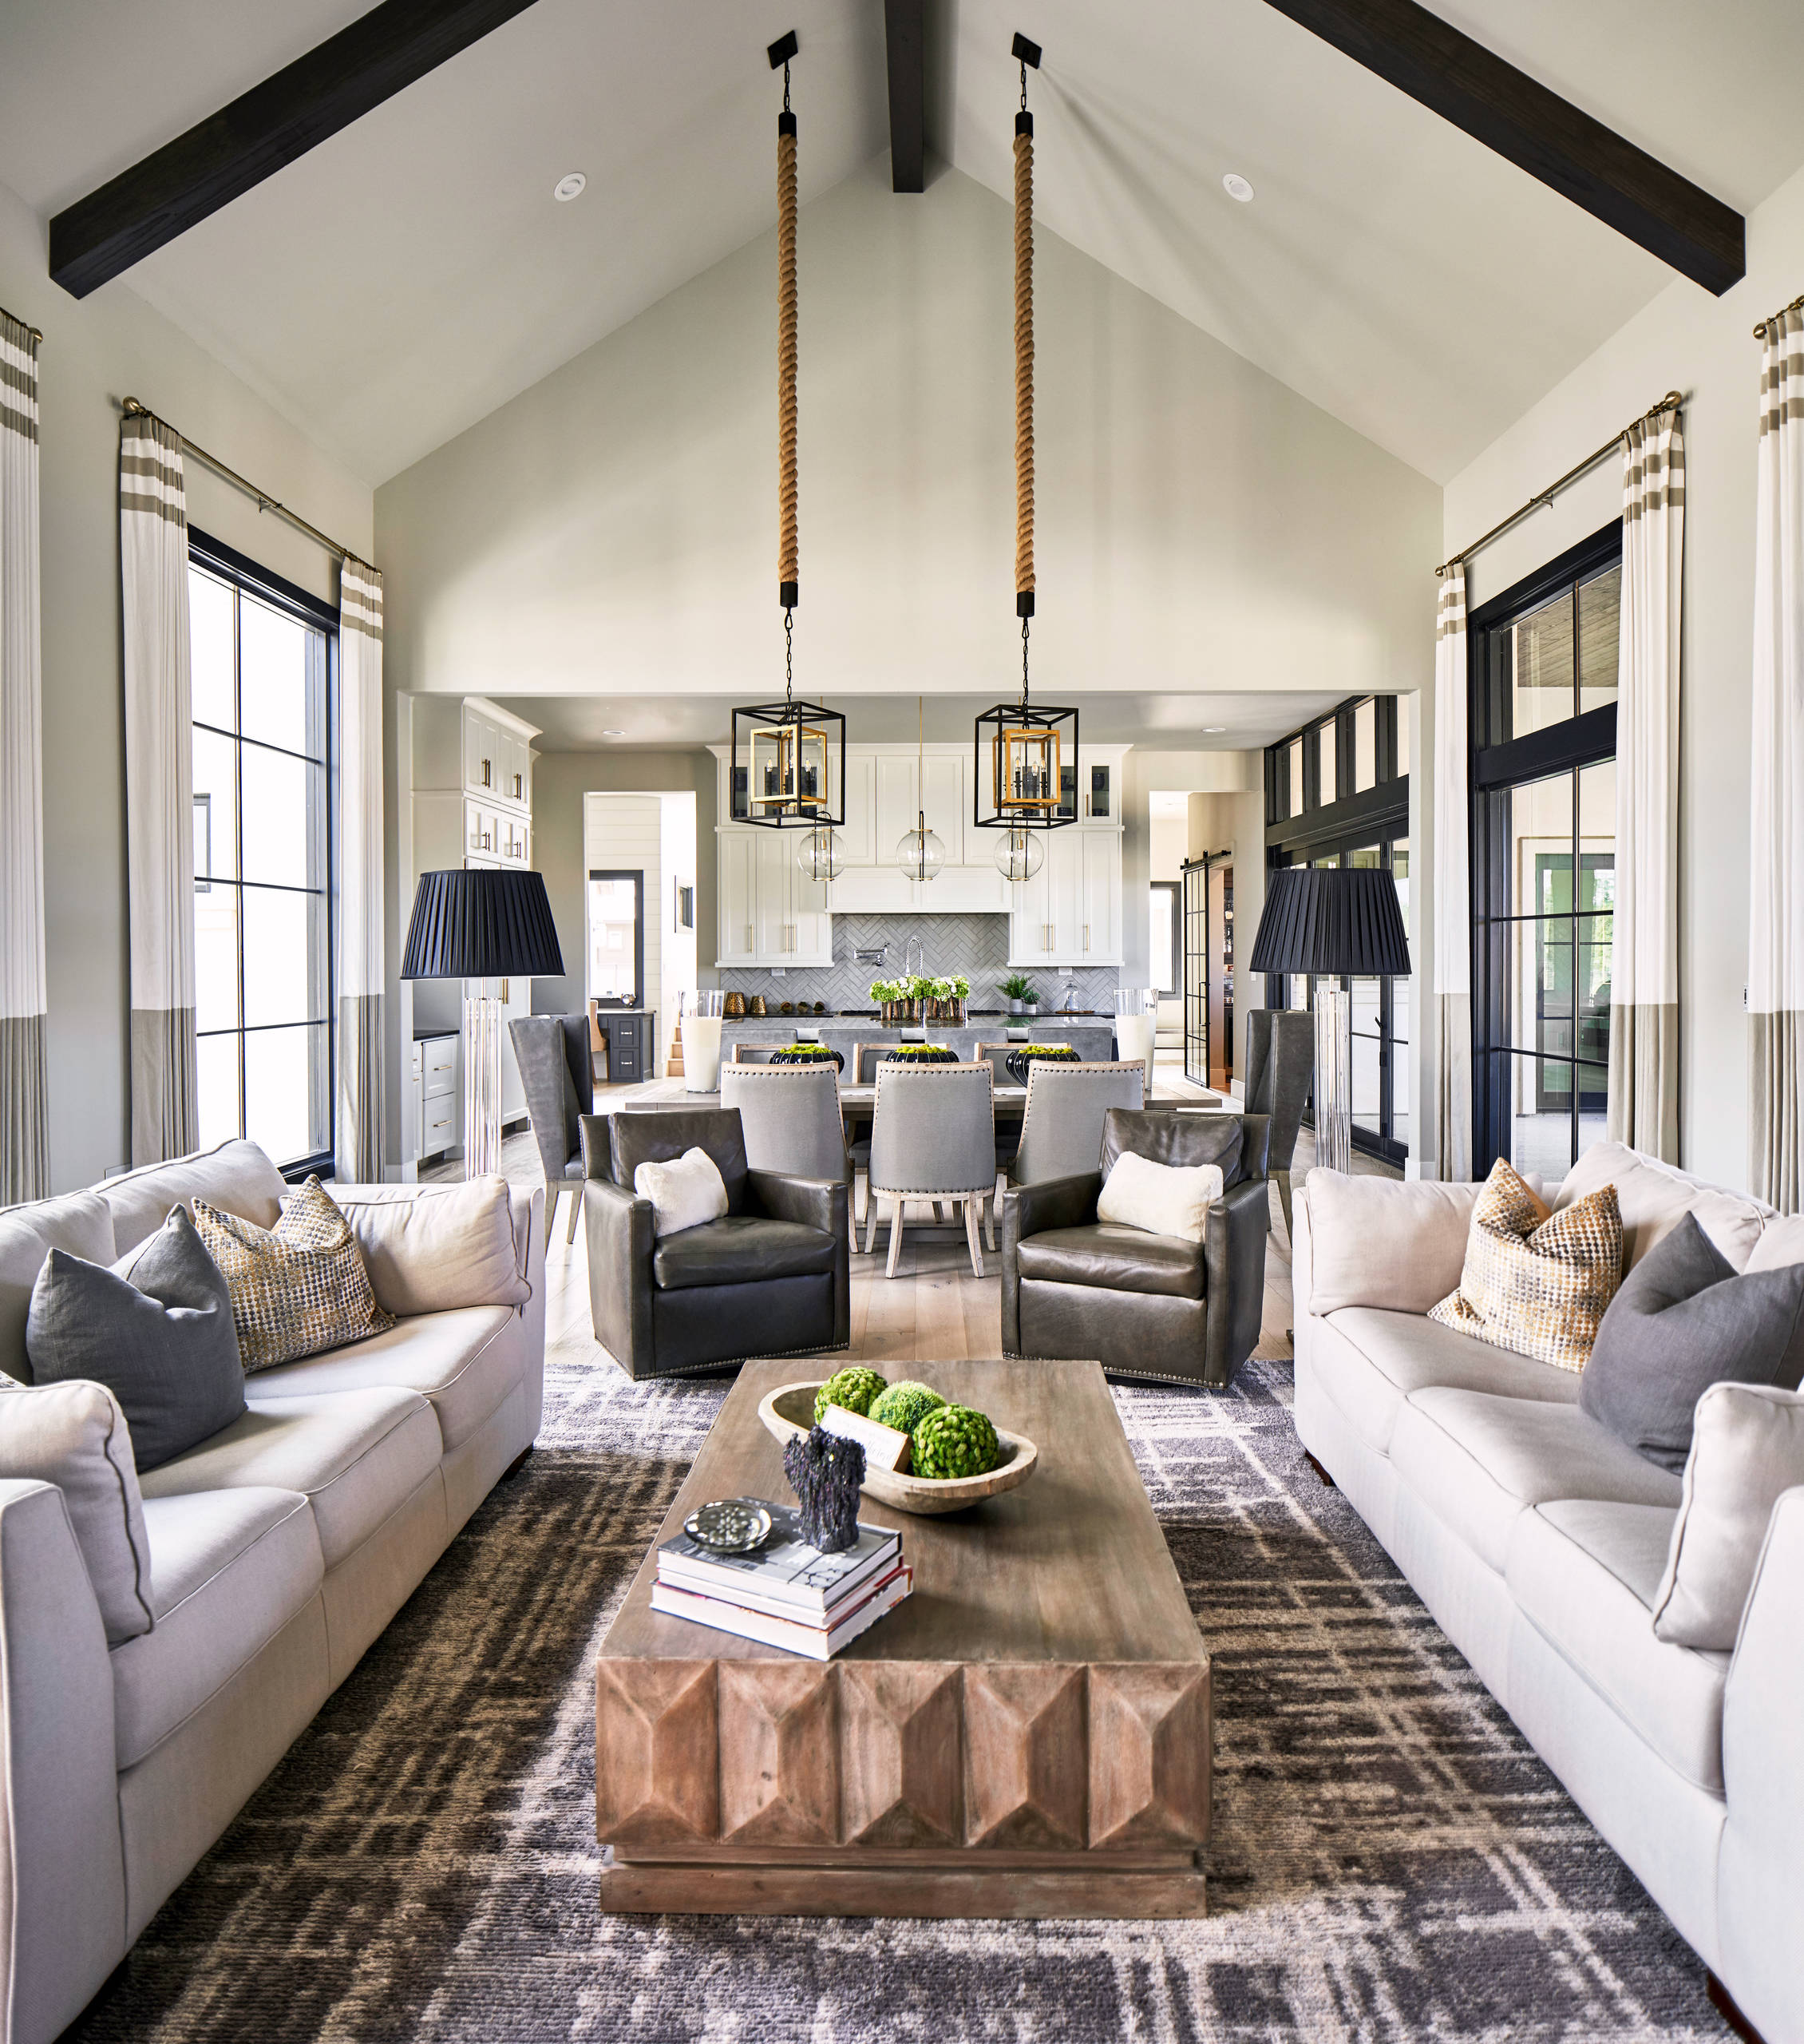 75 Beautiful Carpeted Open Concept Living Room Pictures Ideas April 2021 Houzz